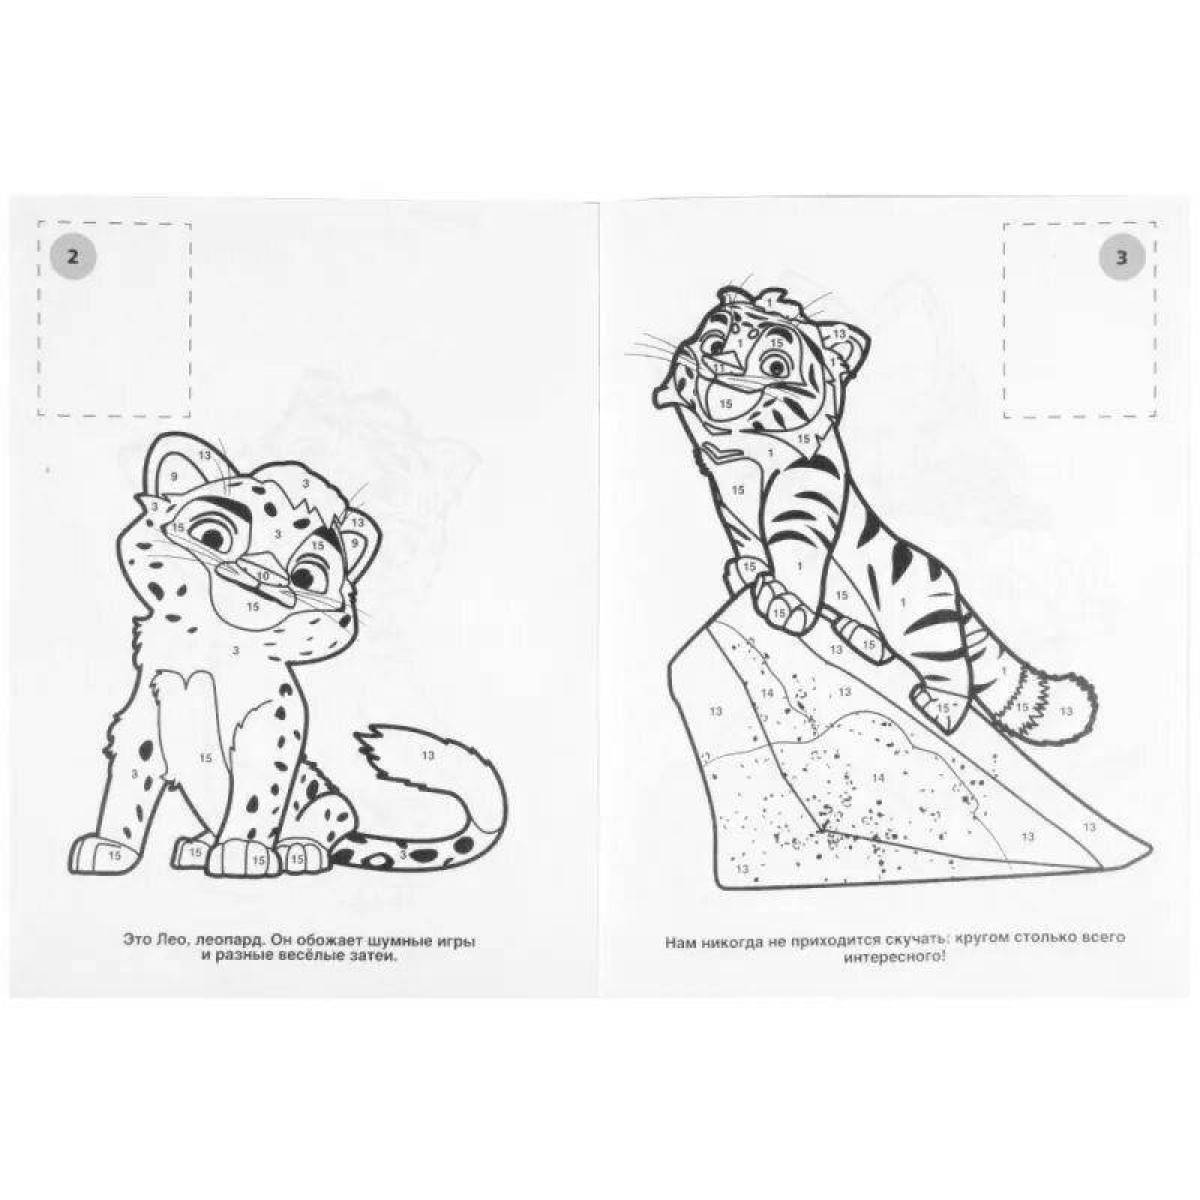 Charming tiger and lion coloring book